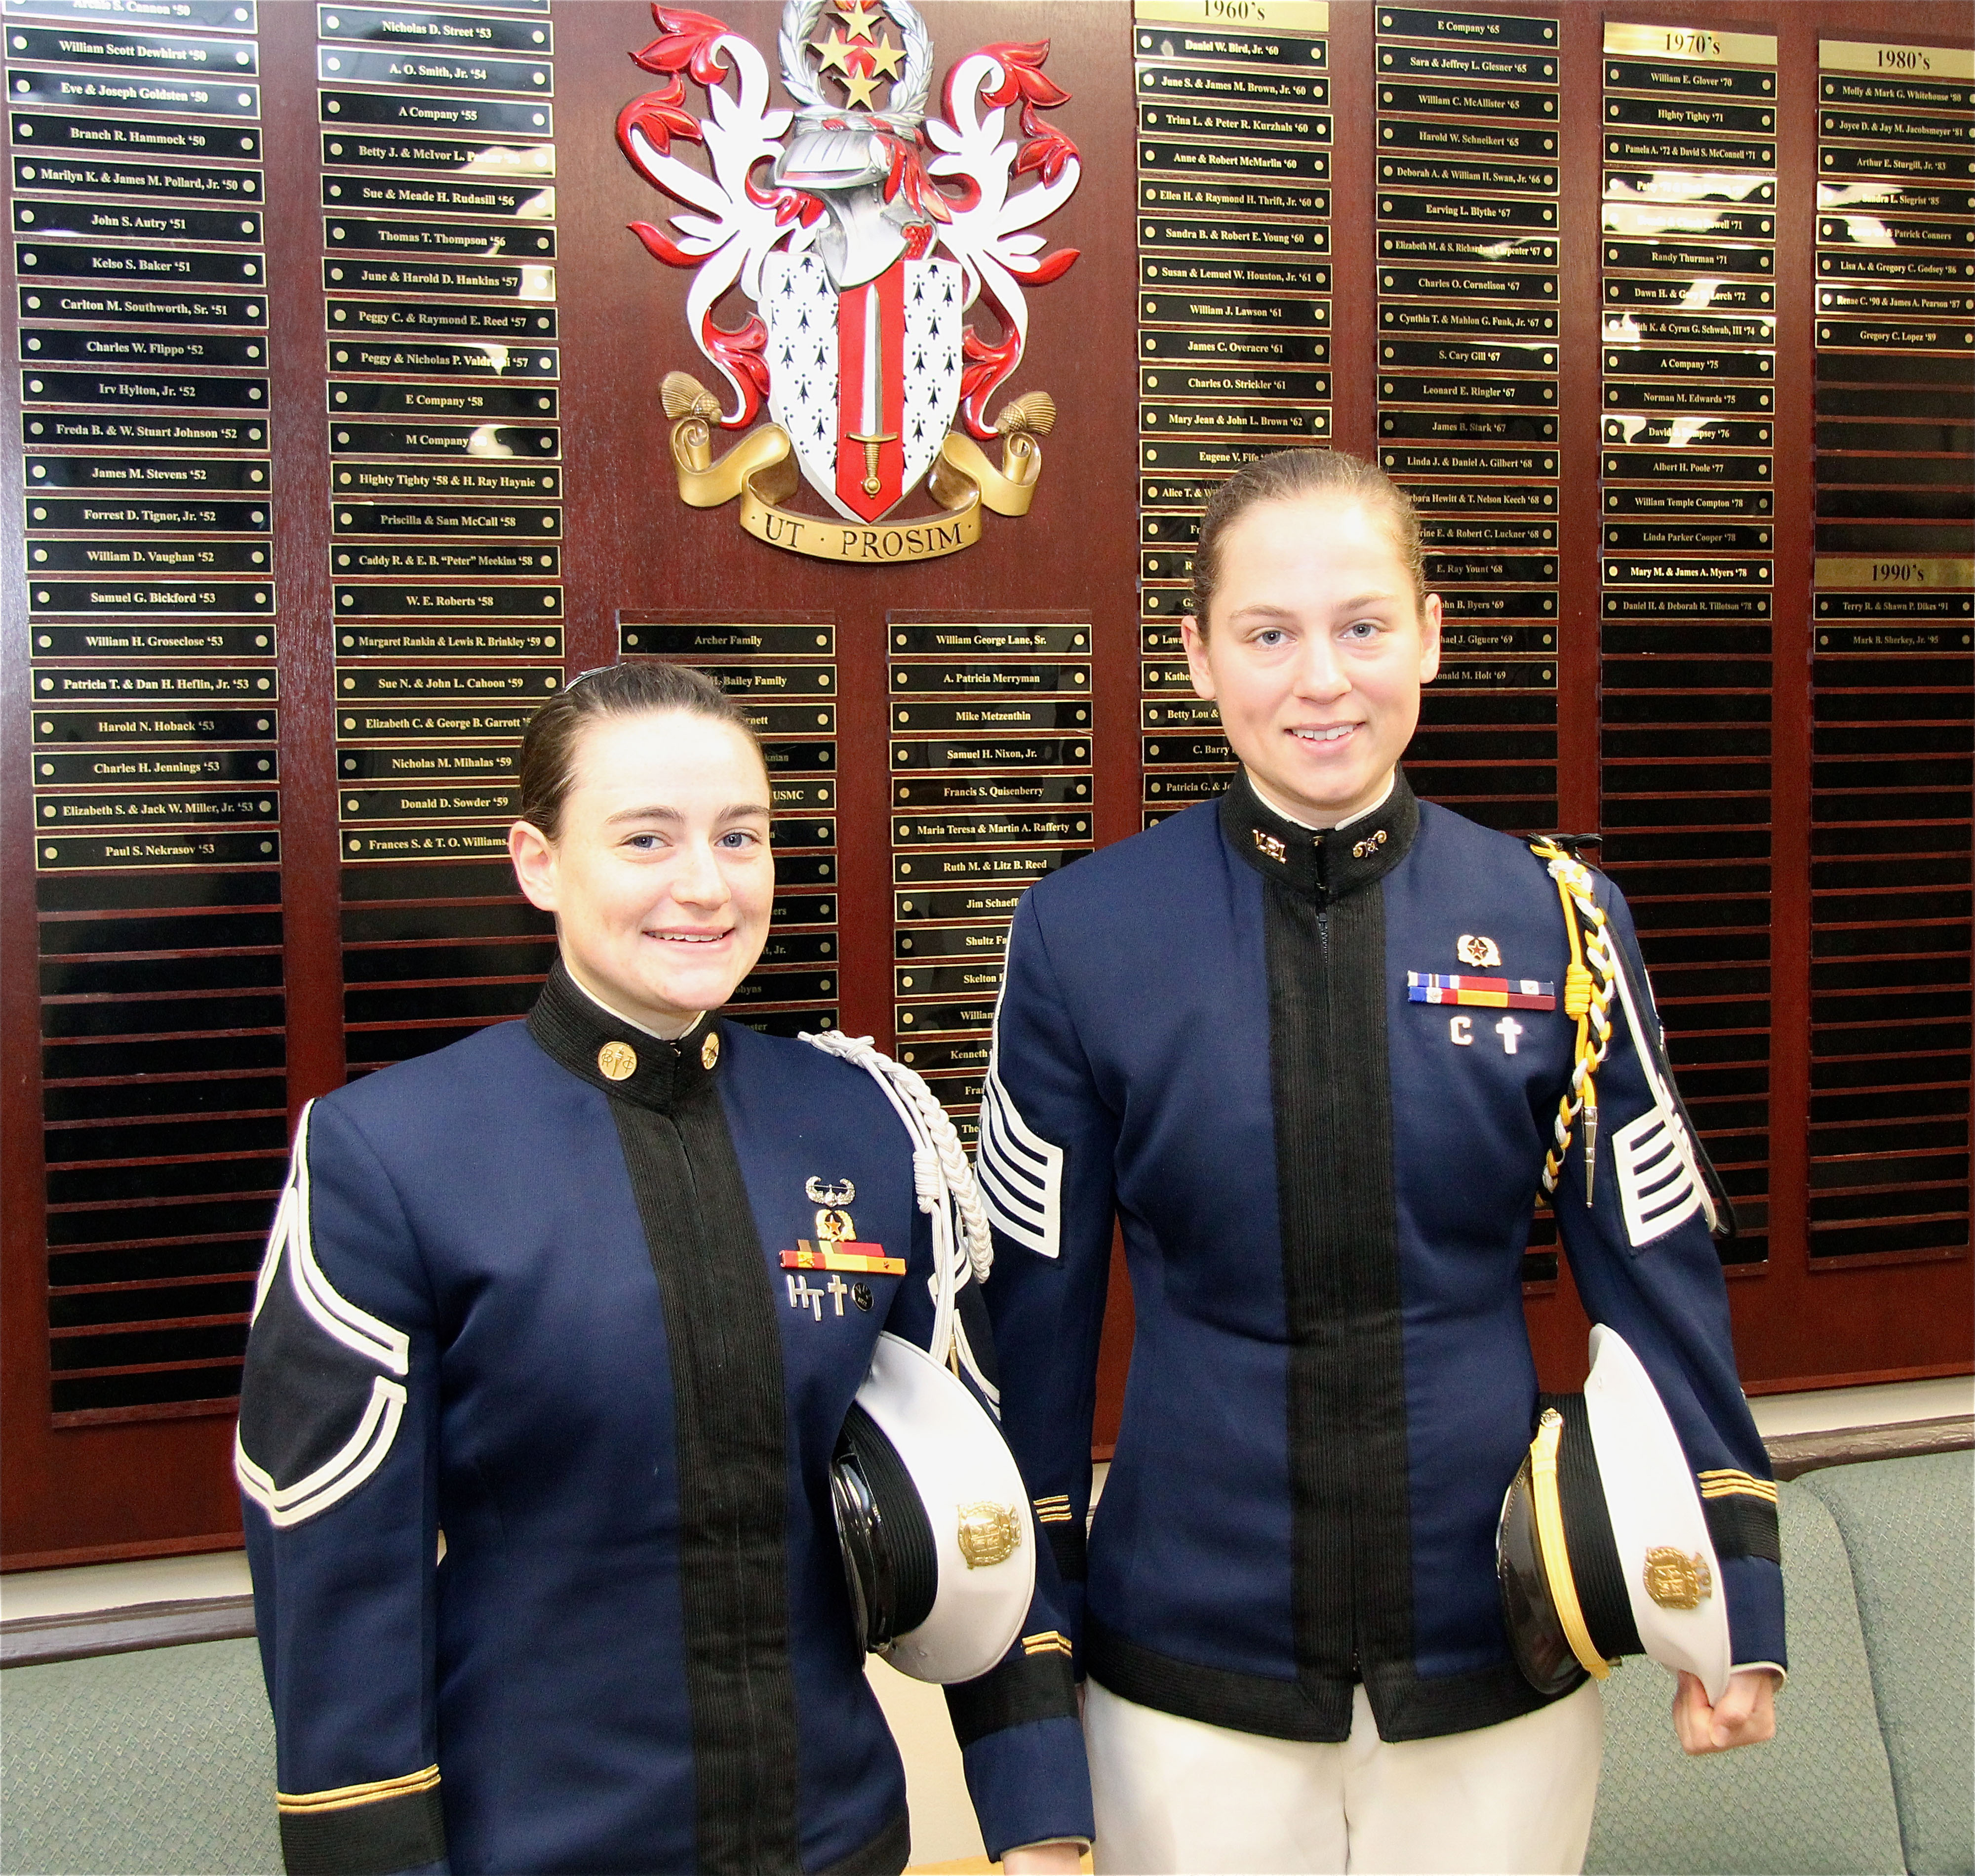 From left to right are Cadets Elaine Altman and Faith Mueller in front of the Corps of Cadets Donor Wall